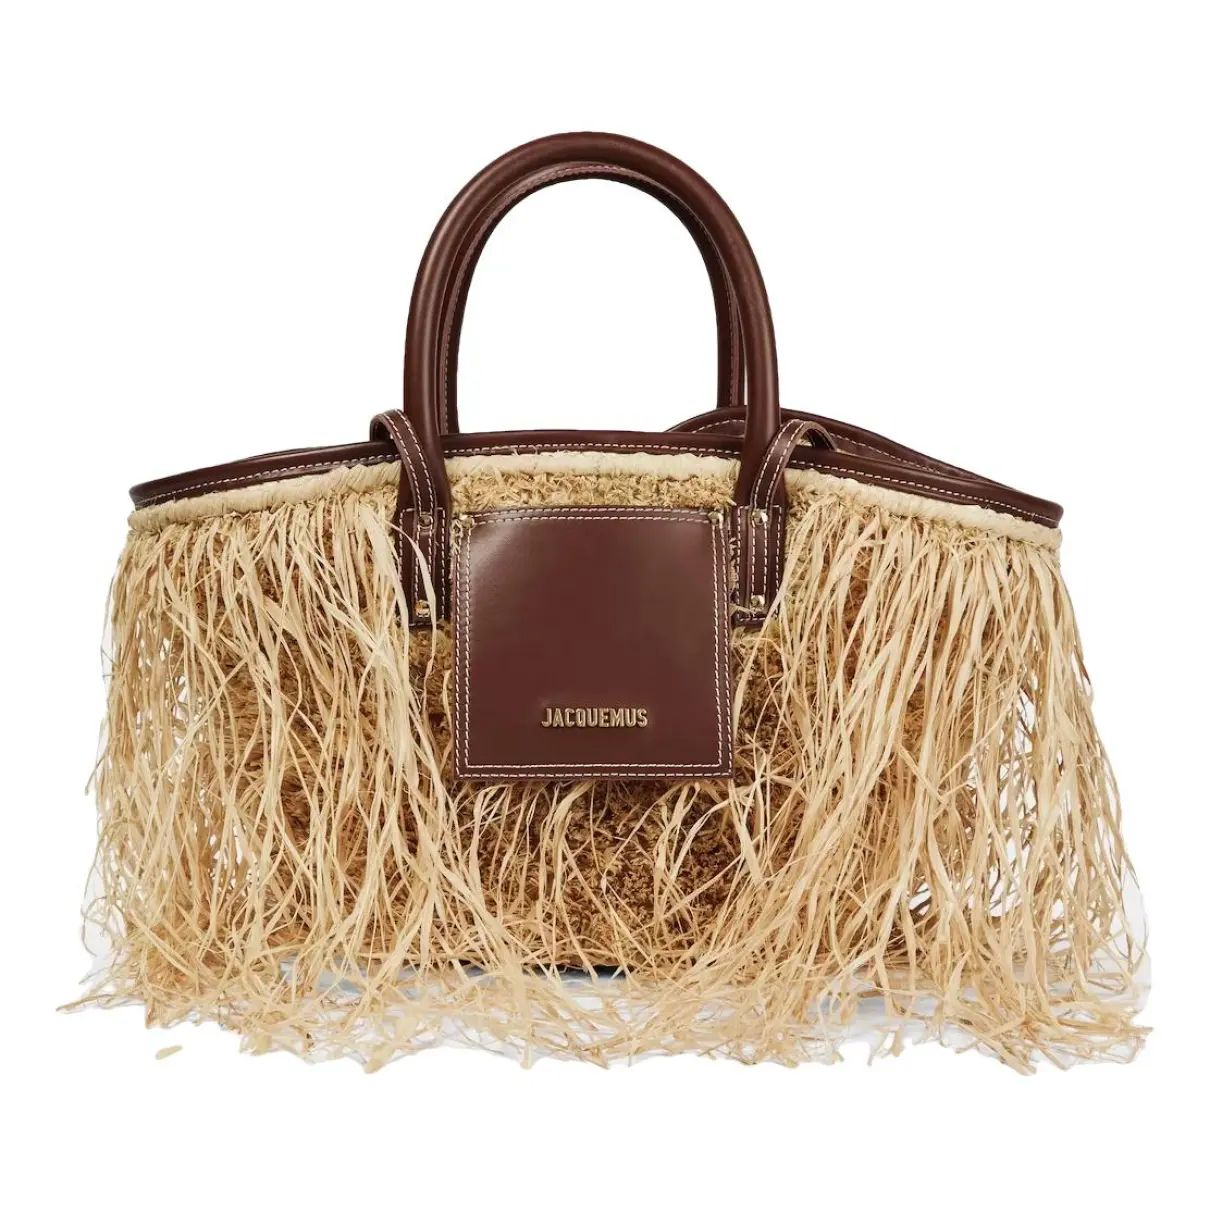 JacquemusLe Grand Panier leather handbagNever worn, with tagBrown, Leather$741.24$677.34Use code ... | Vestiaire Collective (Global)